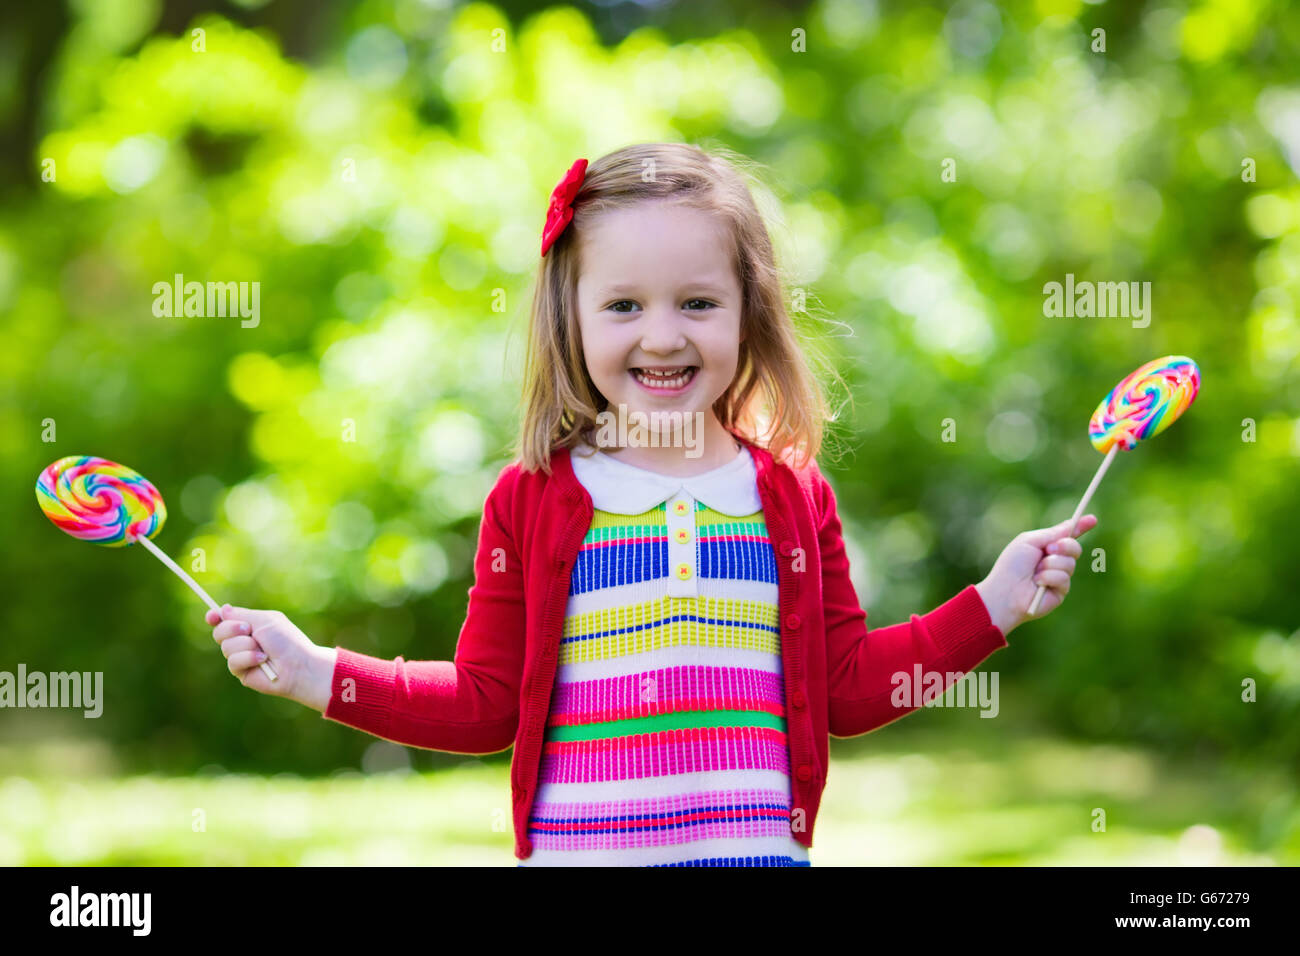 Cute little girl with big colorful lollipop. Child eating sweet candy bar. Sweets for young kids Stock Photo